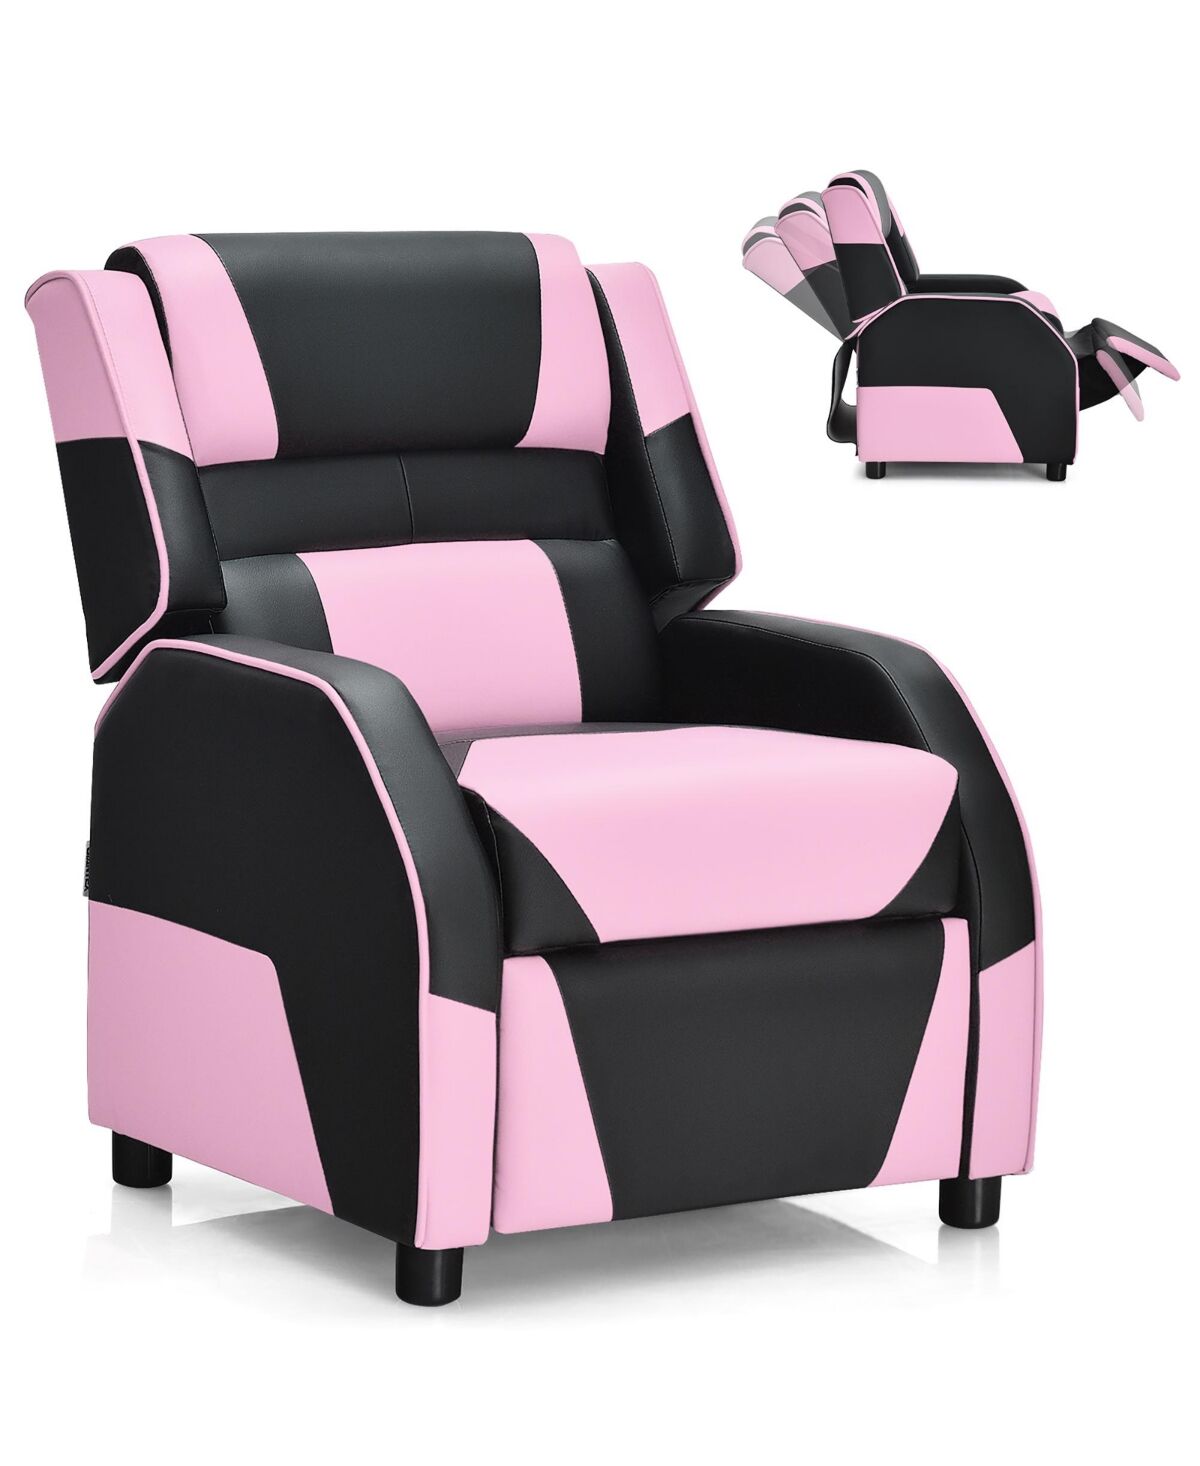 Costway Kids Youth Gaming Sofa Recliner w/ Headrest & Footrest - Pink